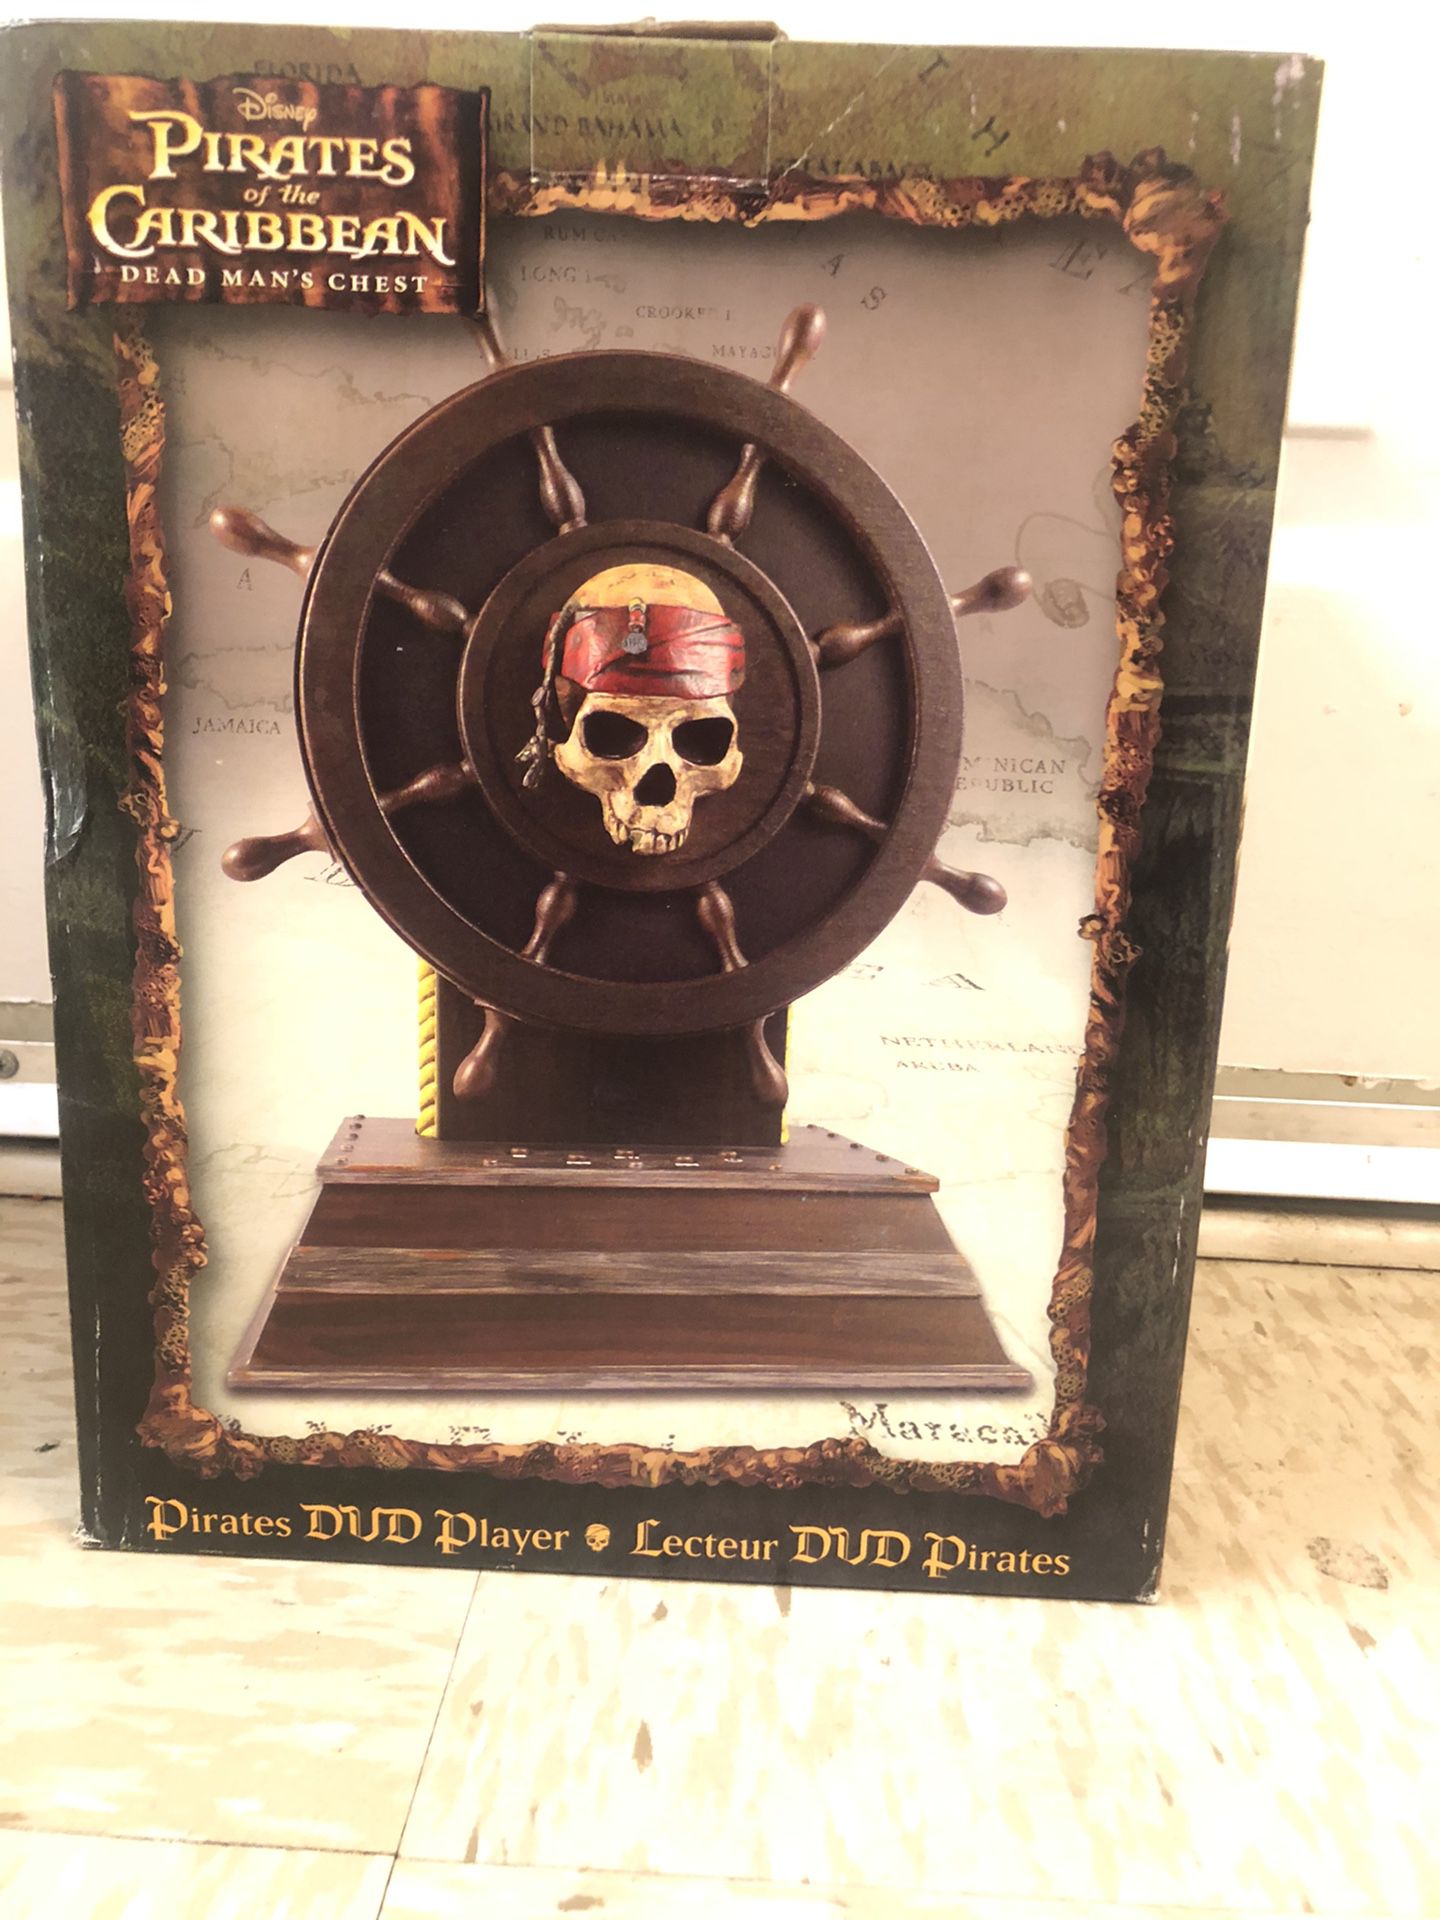 Pirates of the Caribbean Dead Man’s Chest DVD Player